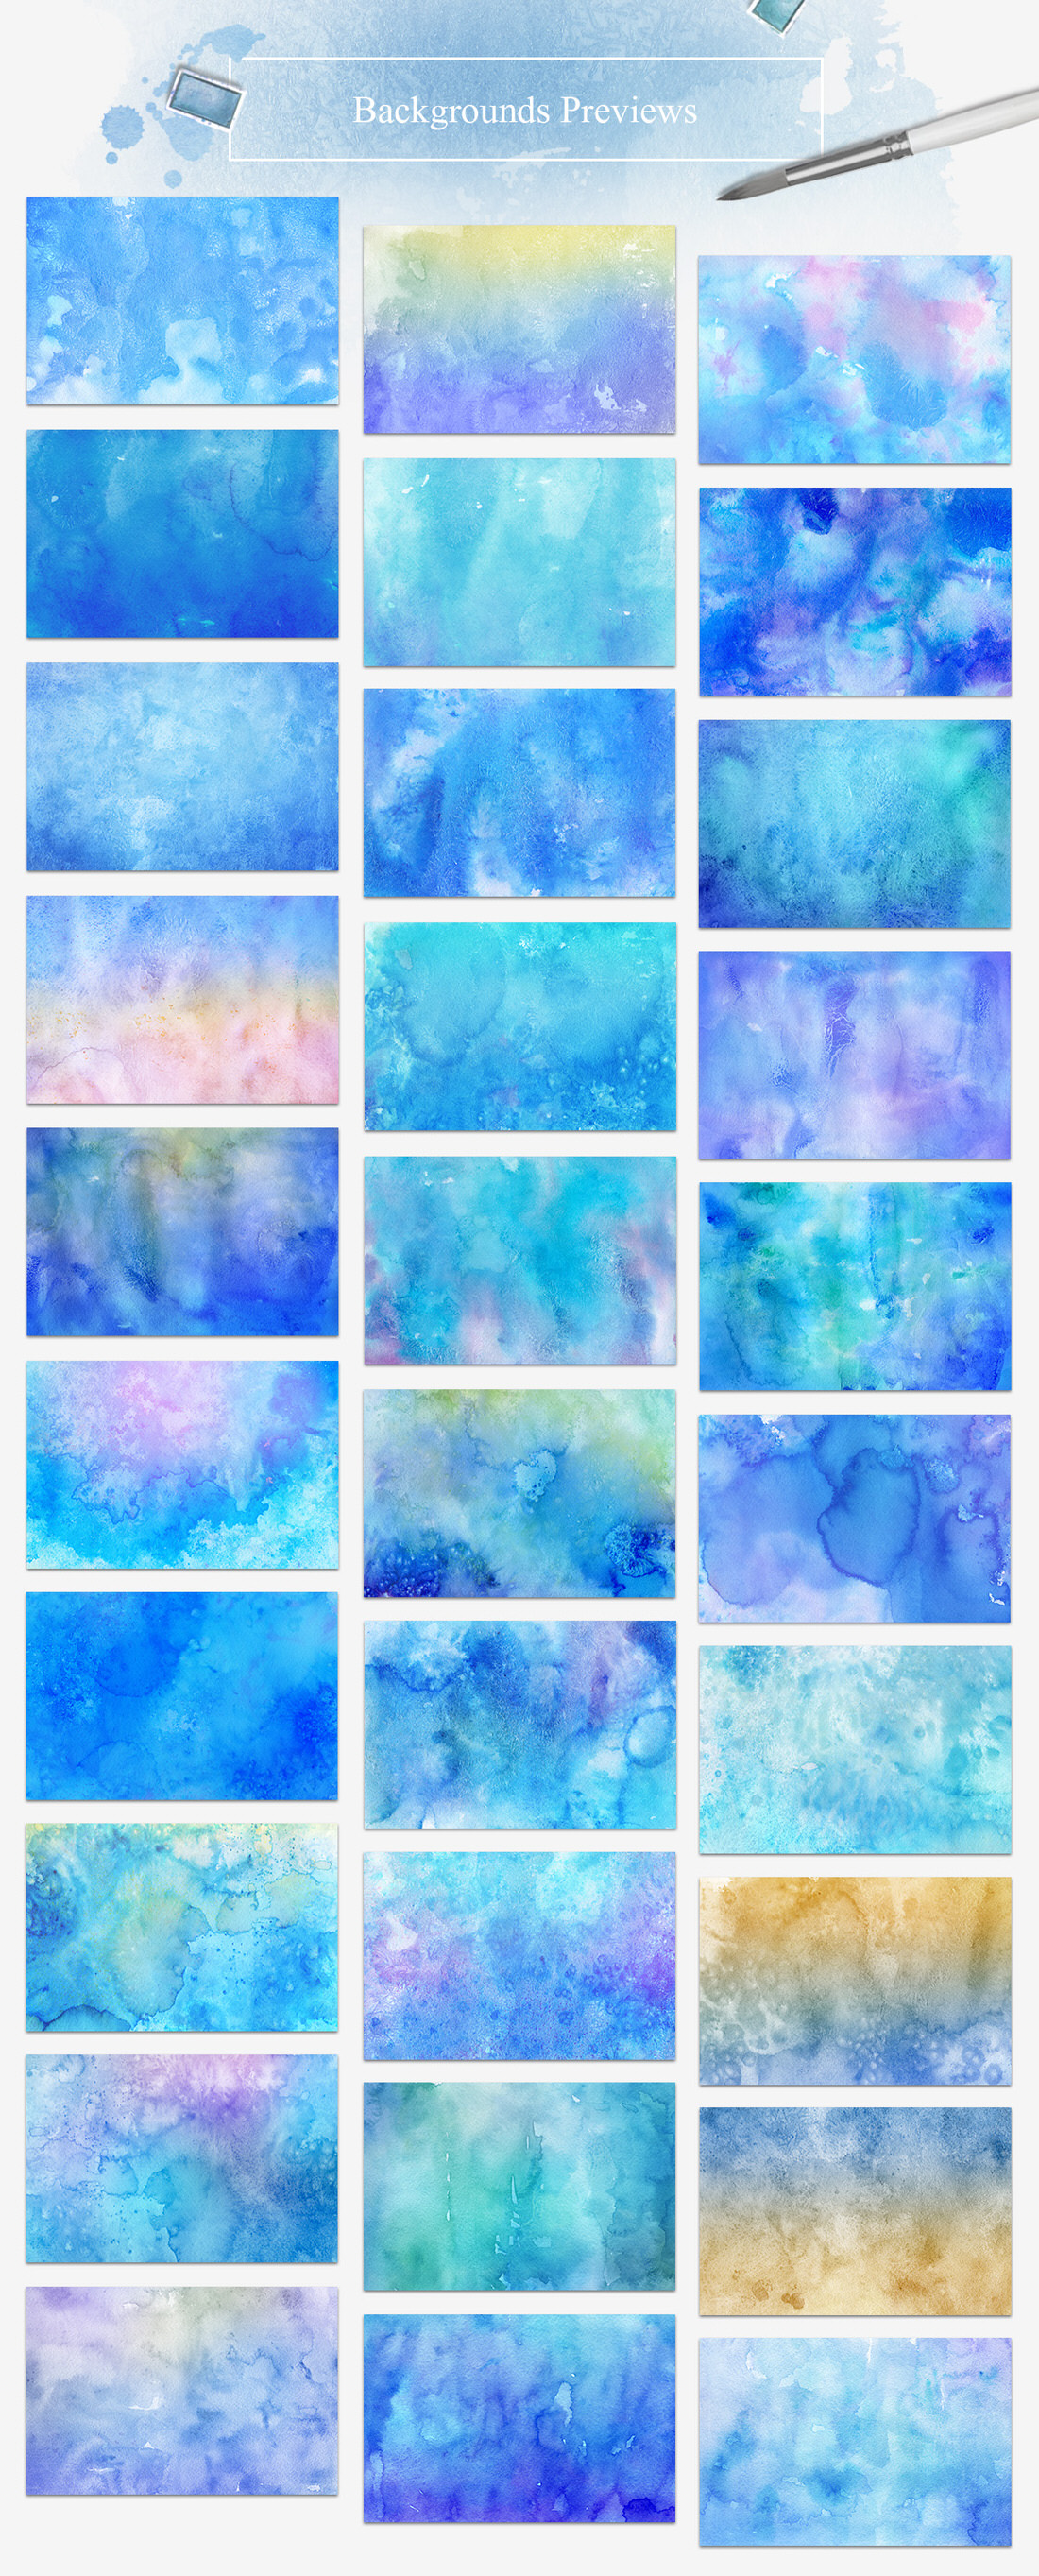 backgrounds